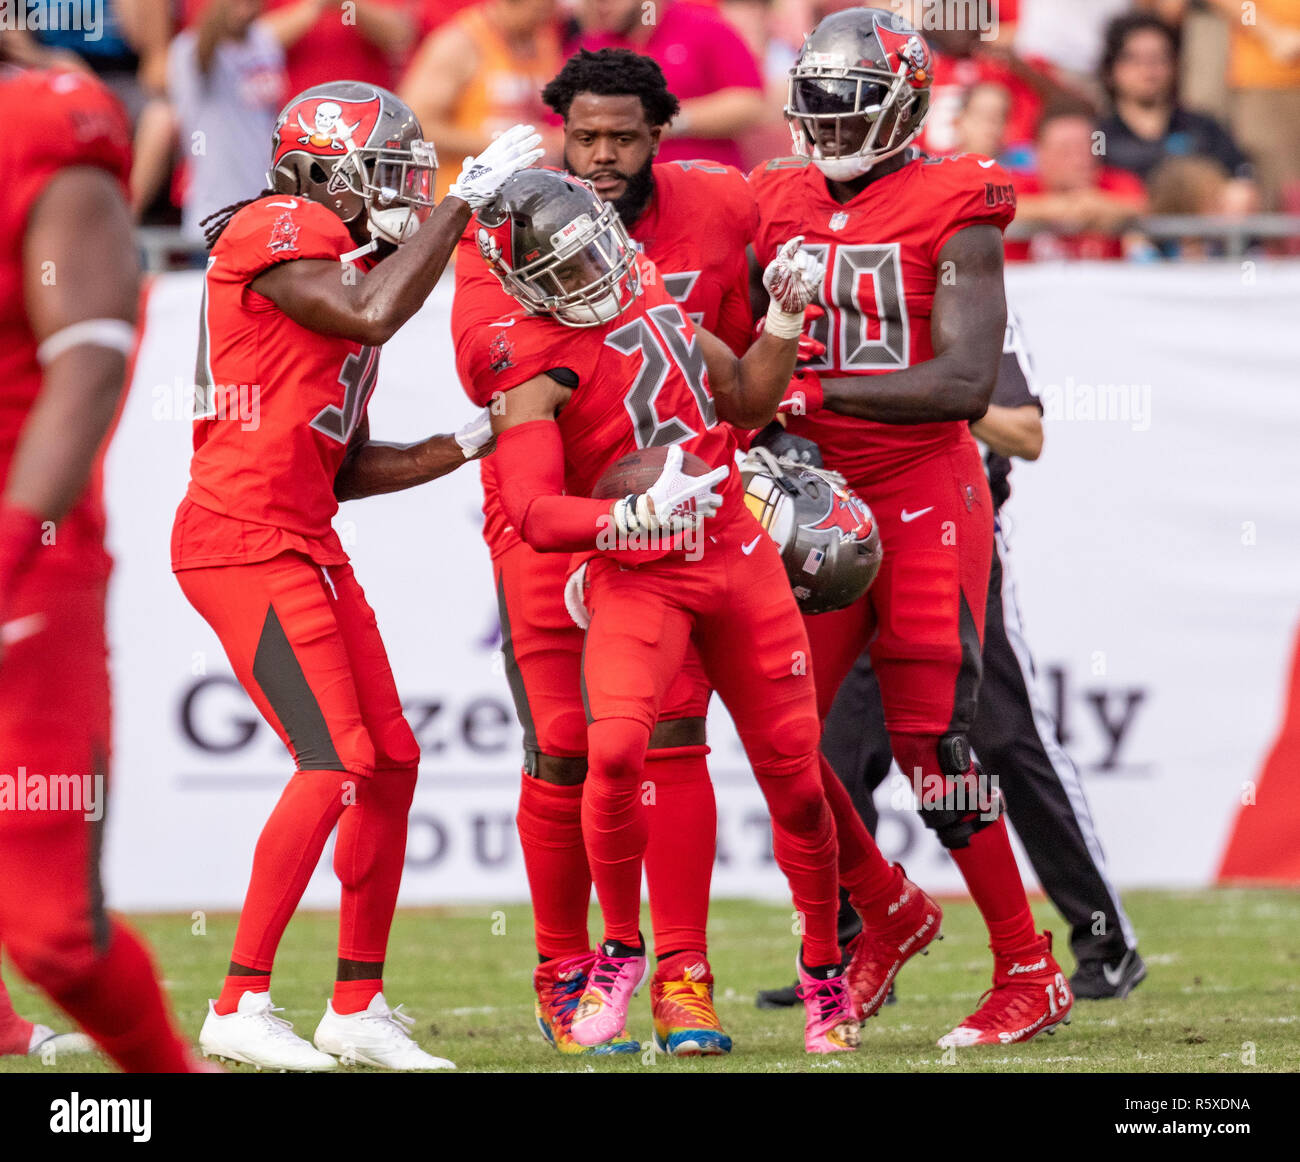 Tampa, Florida, USA. 02nd Dec, 2018. Tampa Bay Buccaneers defensive back Andrew Adams (26) celebrates with teammates after making his 3rd interception of the game during the game between the Carolina Panthers and the Tampa Bay Buccaneers at Raymond James Stadium in Tampa, Florida. Del Mecum/CSM/Alamy Live News Stock Photo